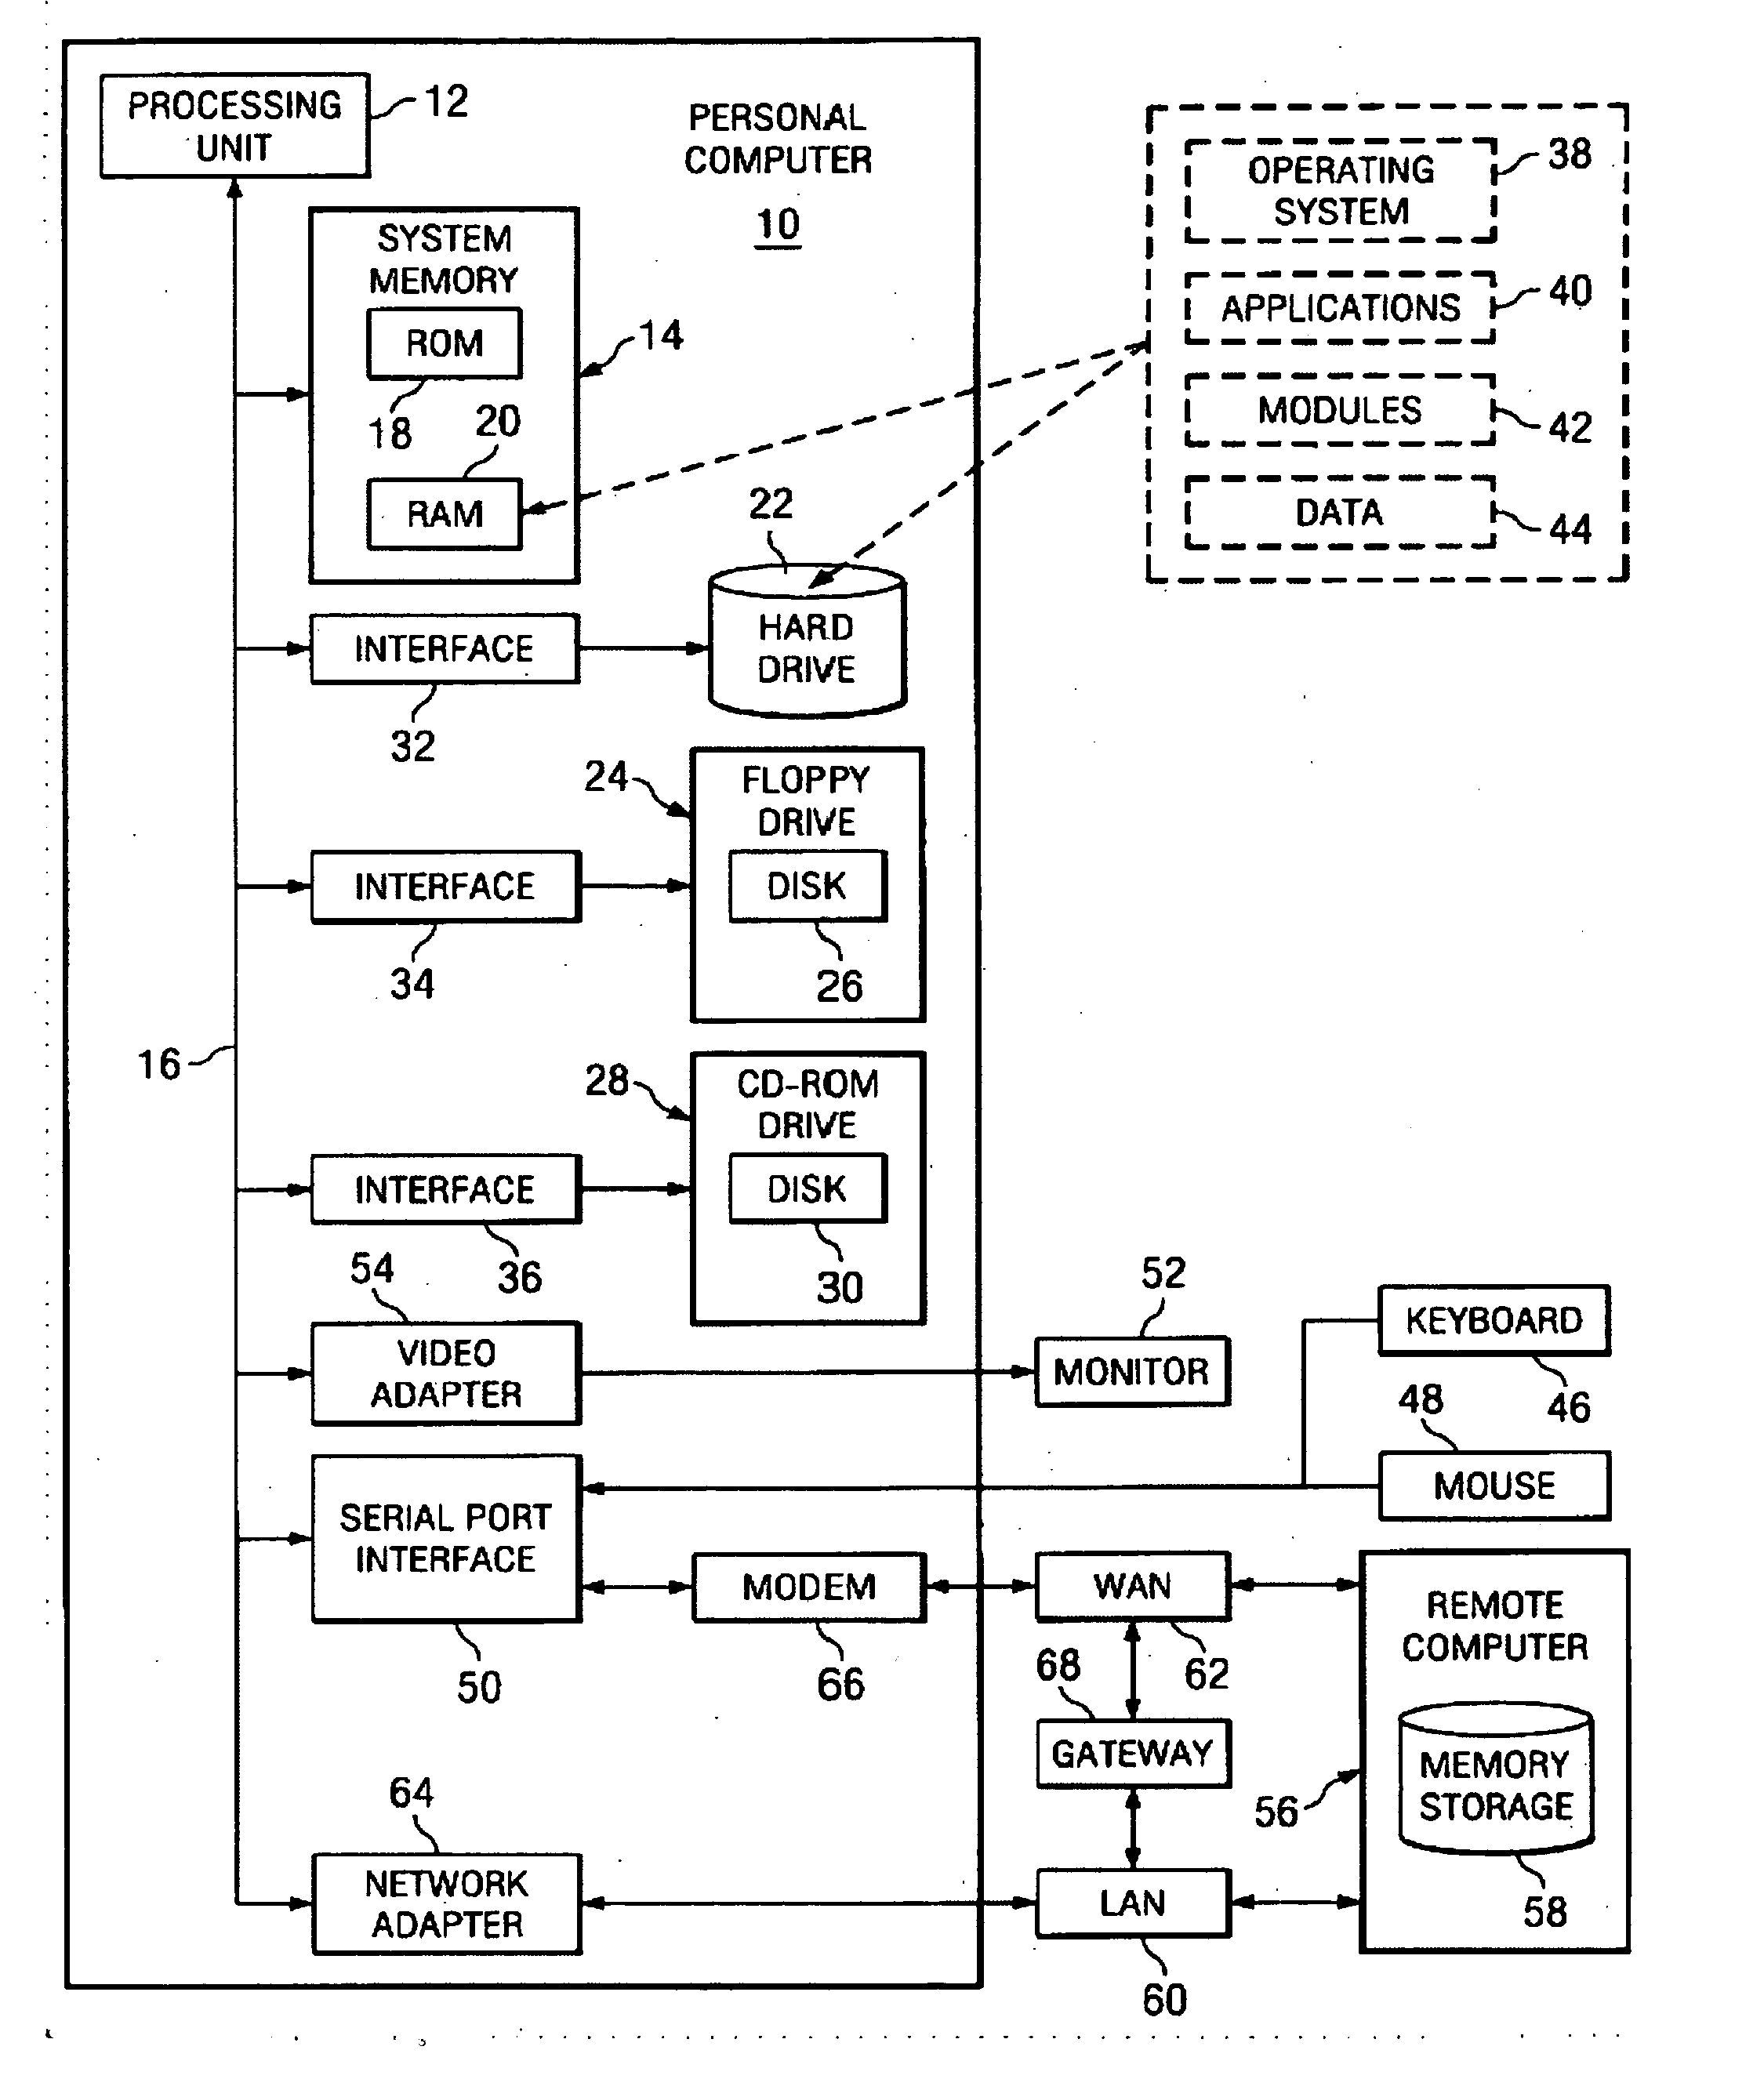 Method and system for tailoring metamodel requirements capture processing to varying users